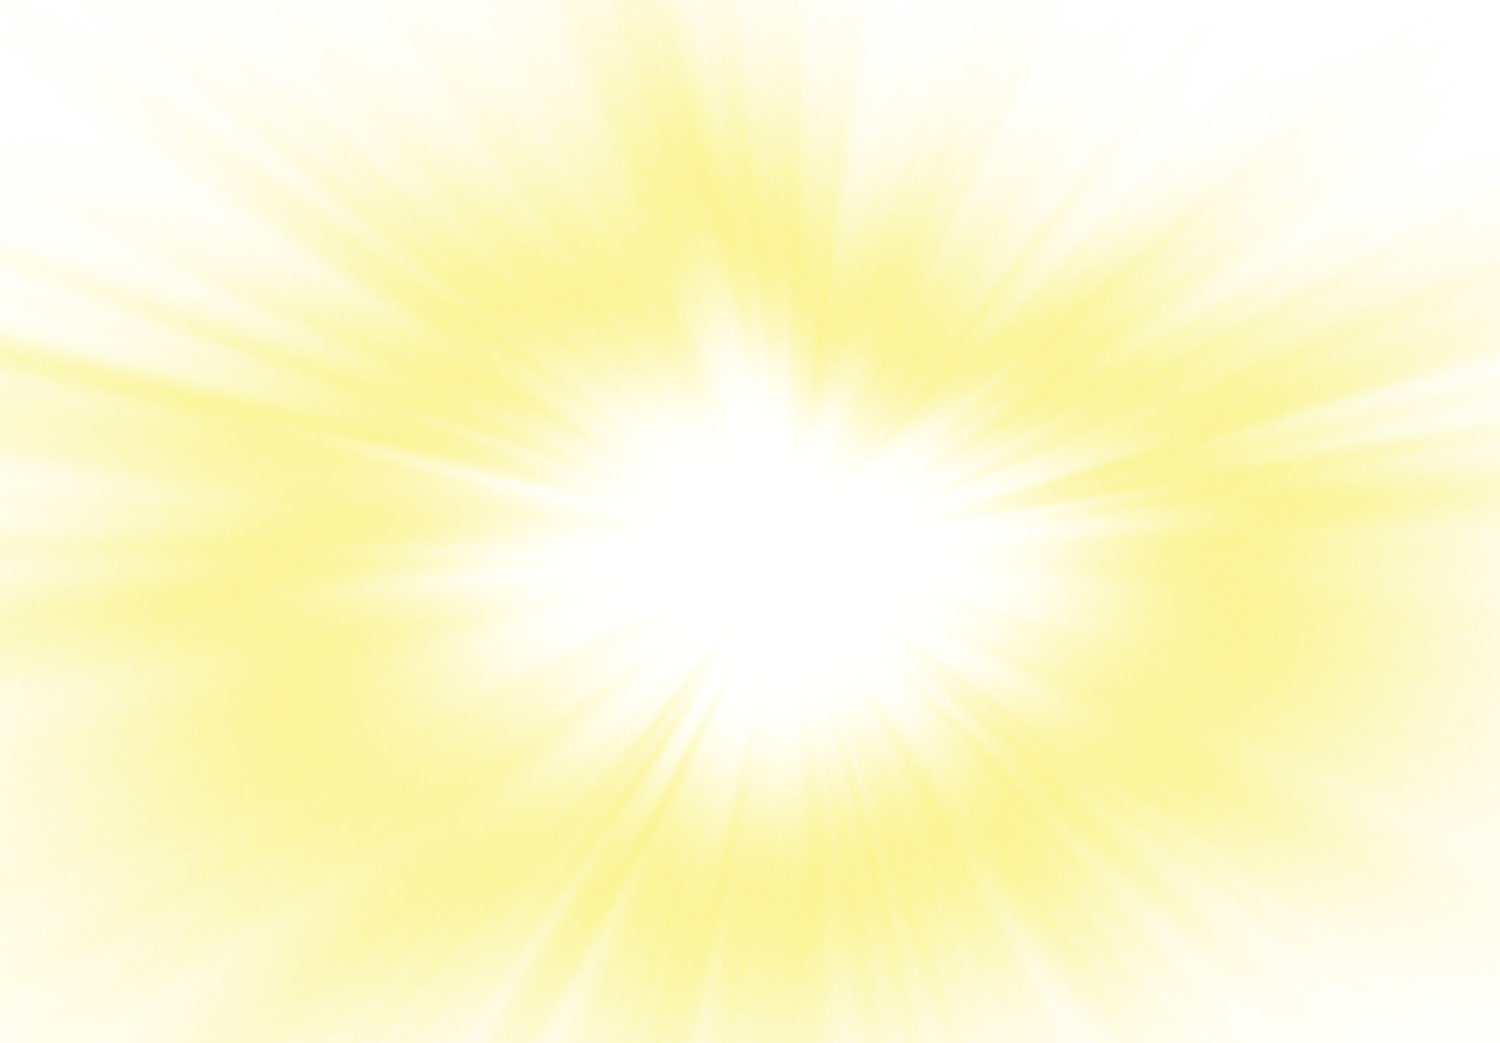 Sunlight Background PNG